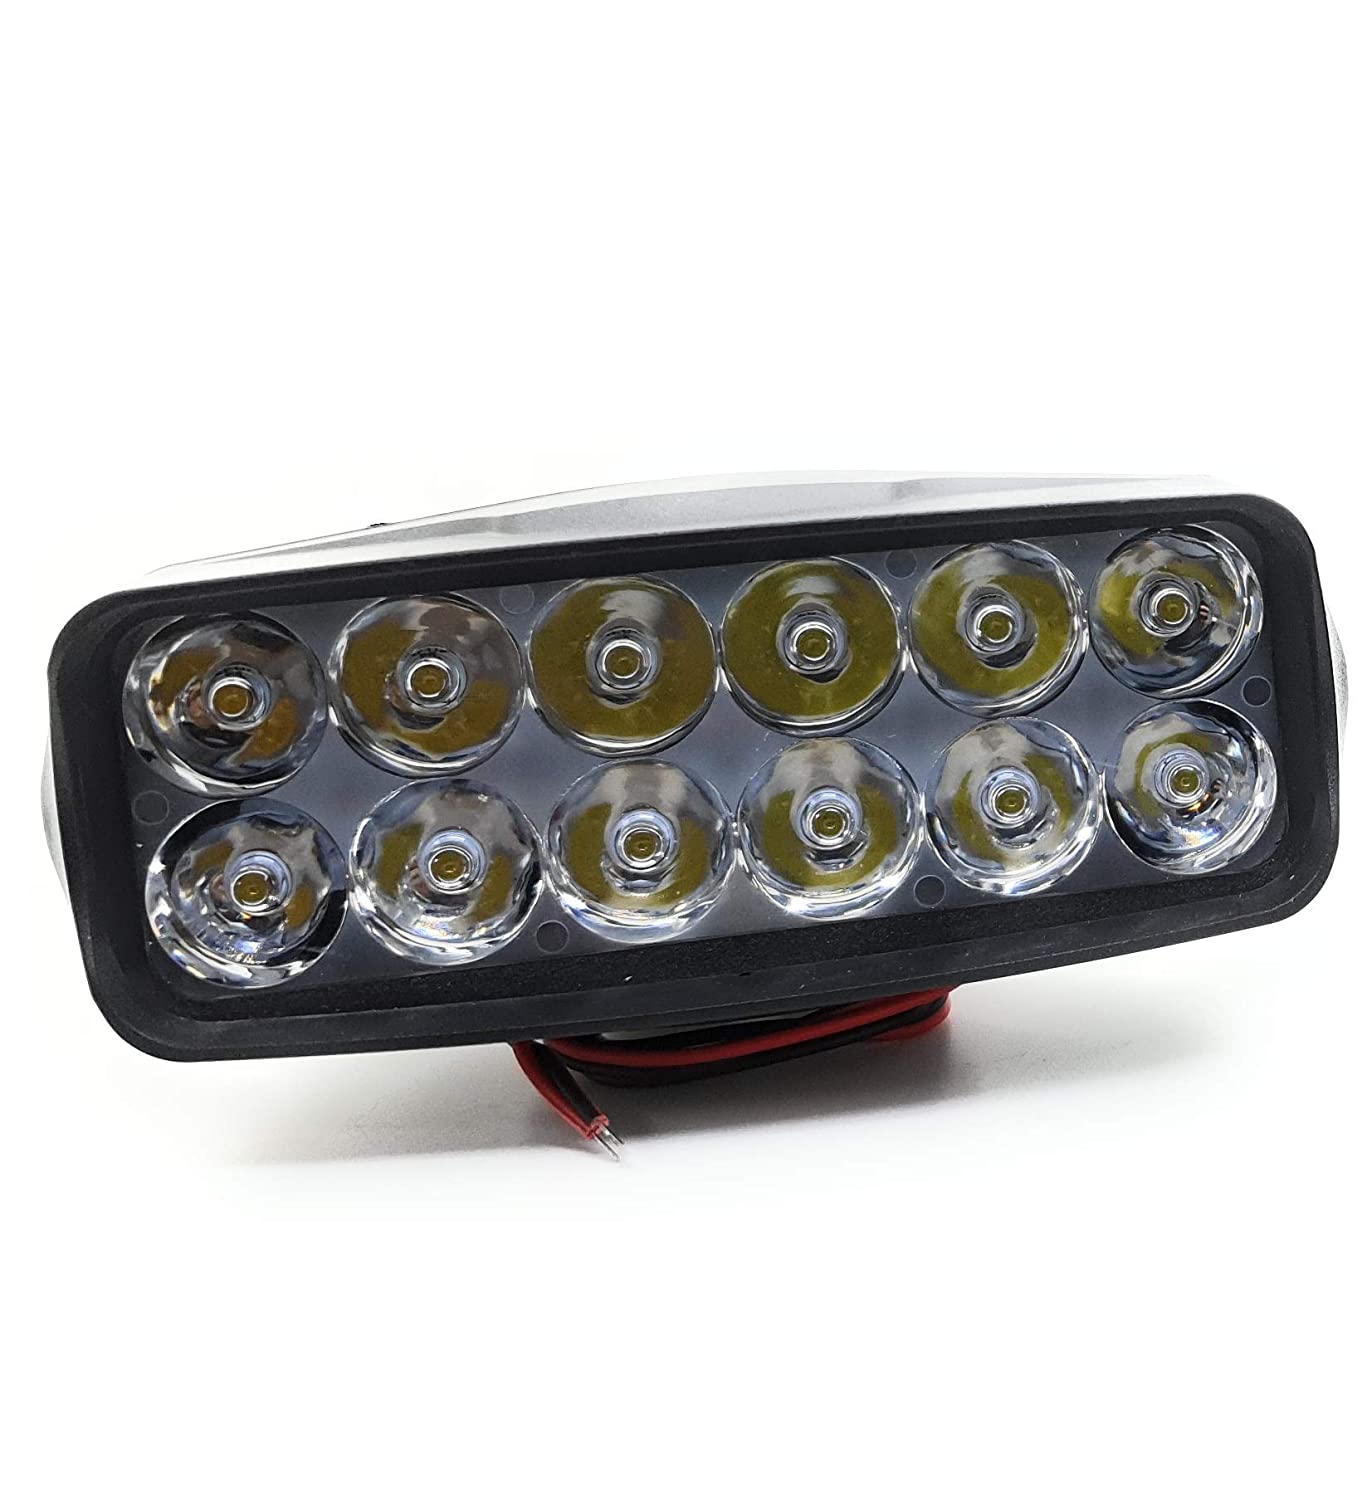 12 LED Fog Lights for Bikes and Cars High Power, Heavy clamp and Strong ABS Plastic. (12 led Single) - bikerstore.in